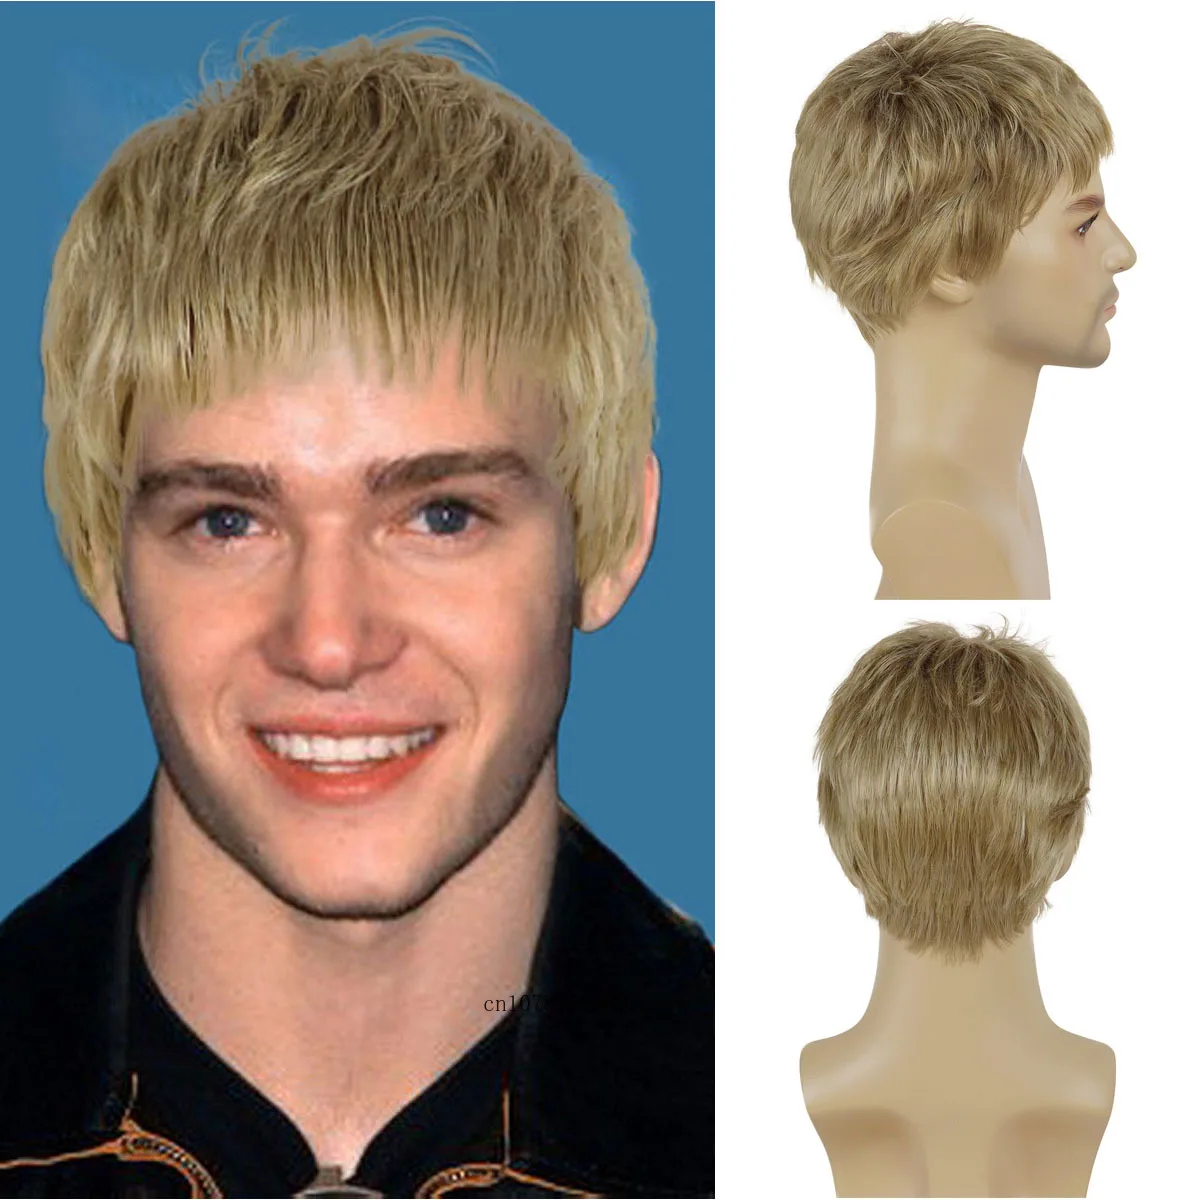 

Natural Haircut Short Straight Wig Blonde Wigs for Men Young Male Boys Wig with Bangs Soft Daily Cosplay Costume Fashion Style